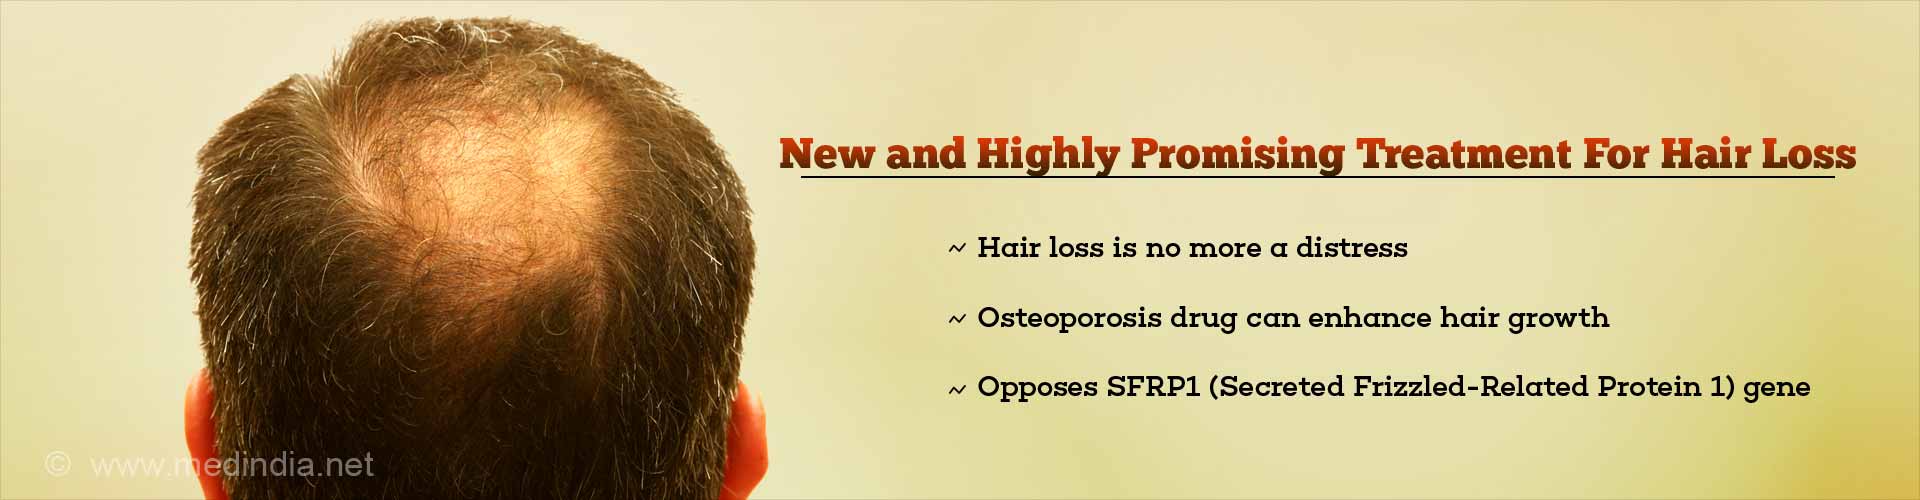 new and highly promising treatment for hair loss
- hair loss is no more a distress
- osteoporosis drug can enhance hair growth
- opposes SFRP1 (secreted frizzled-related protein 1) gene